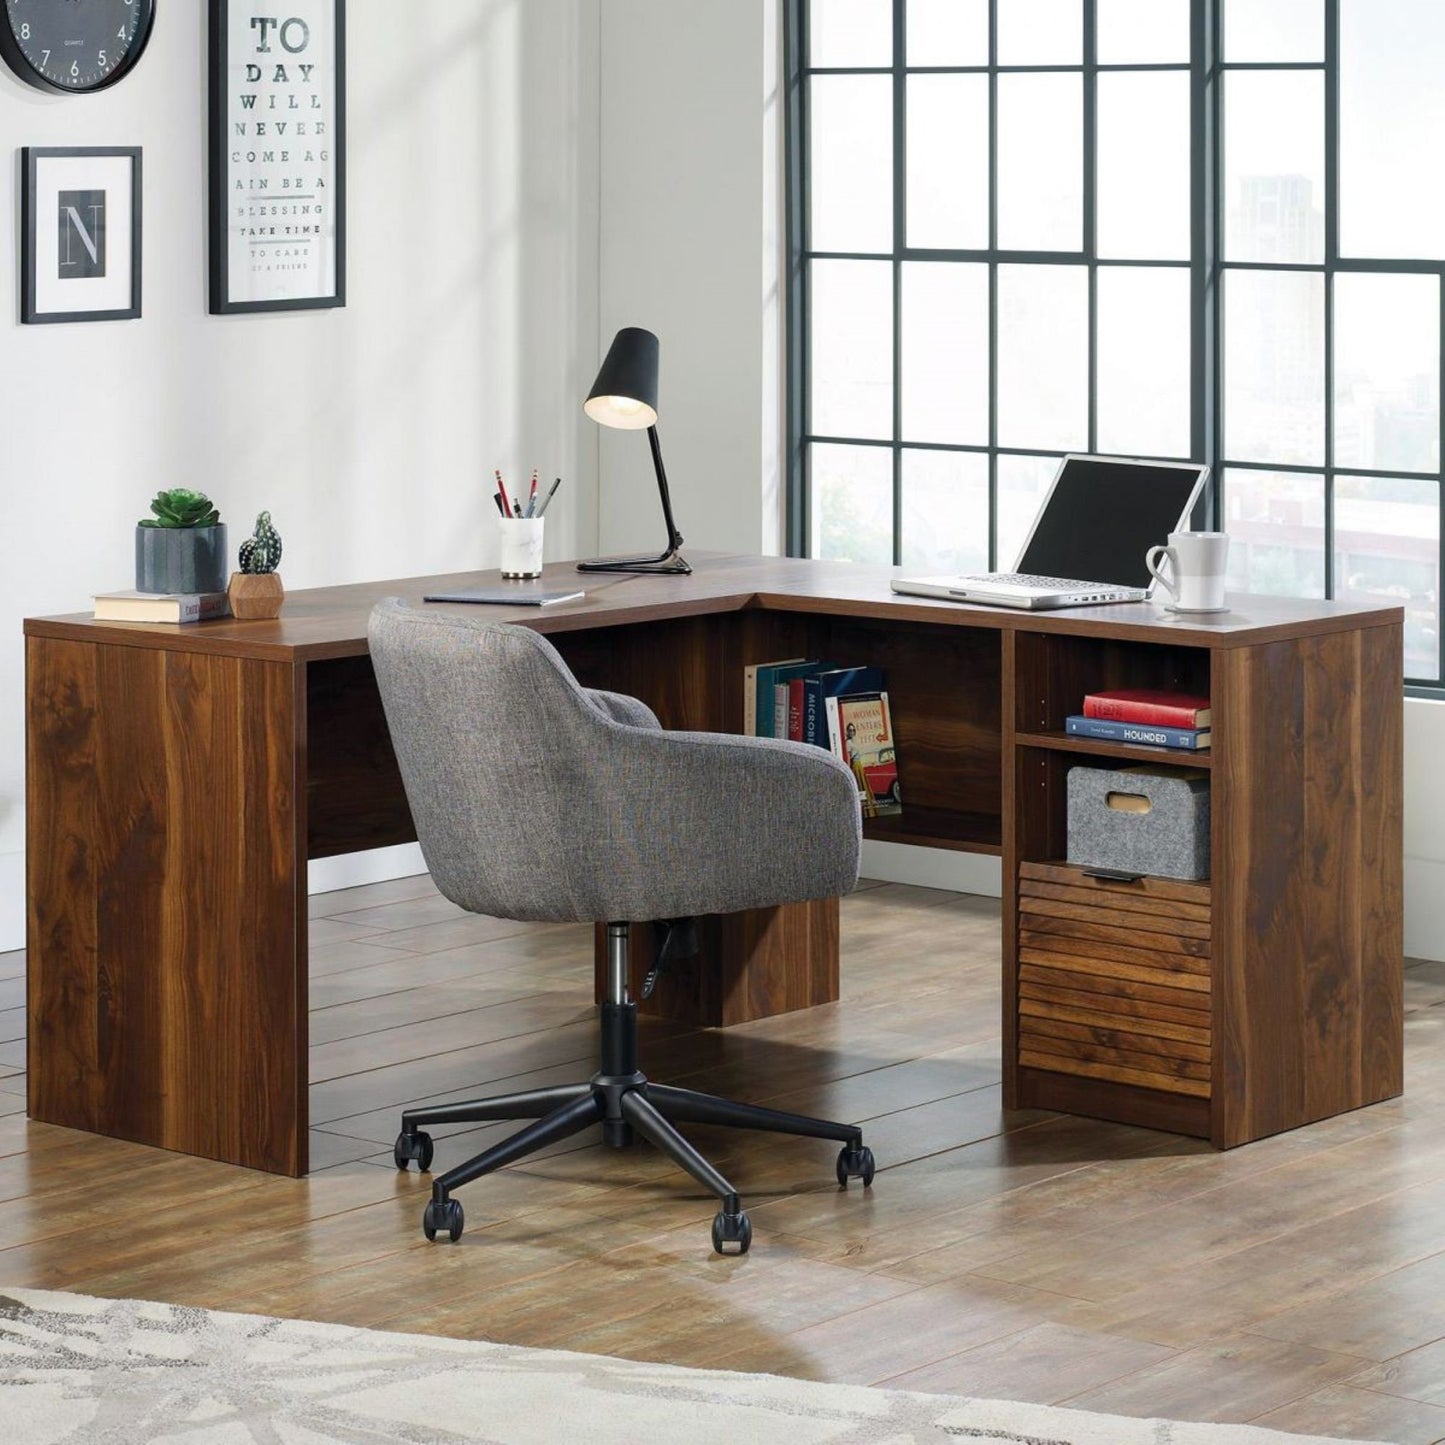 Retro / Mid Century style home office L-shaped office desk in Walnut finish